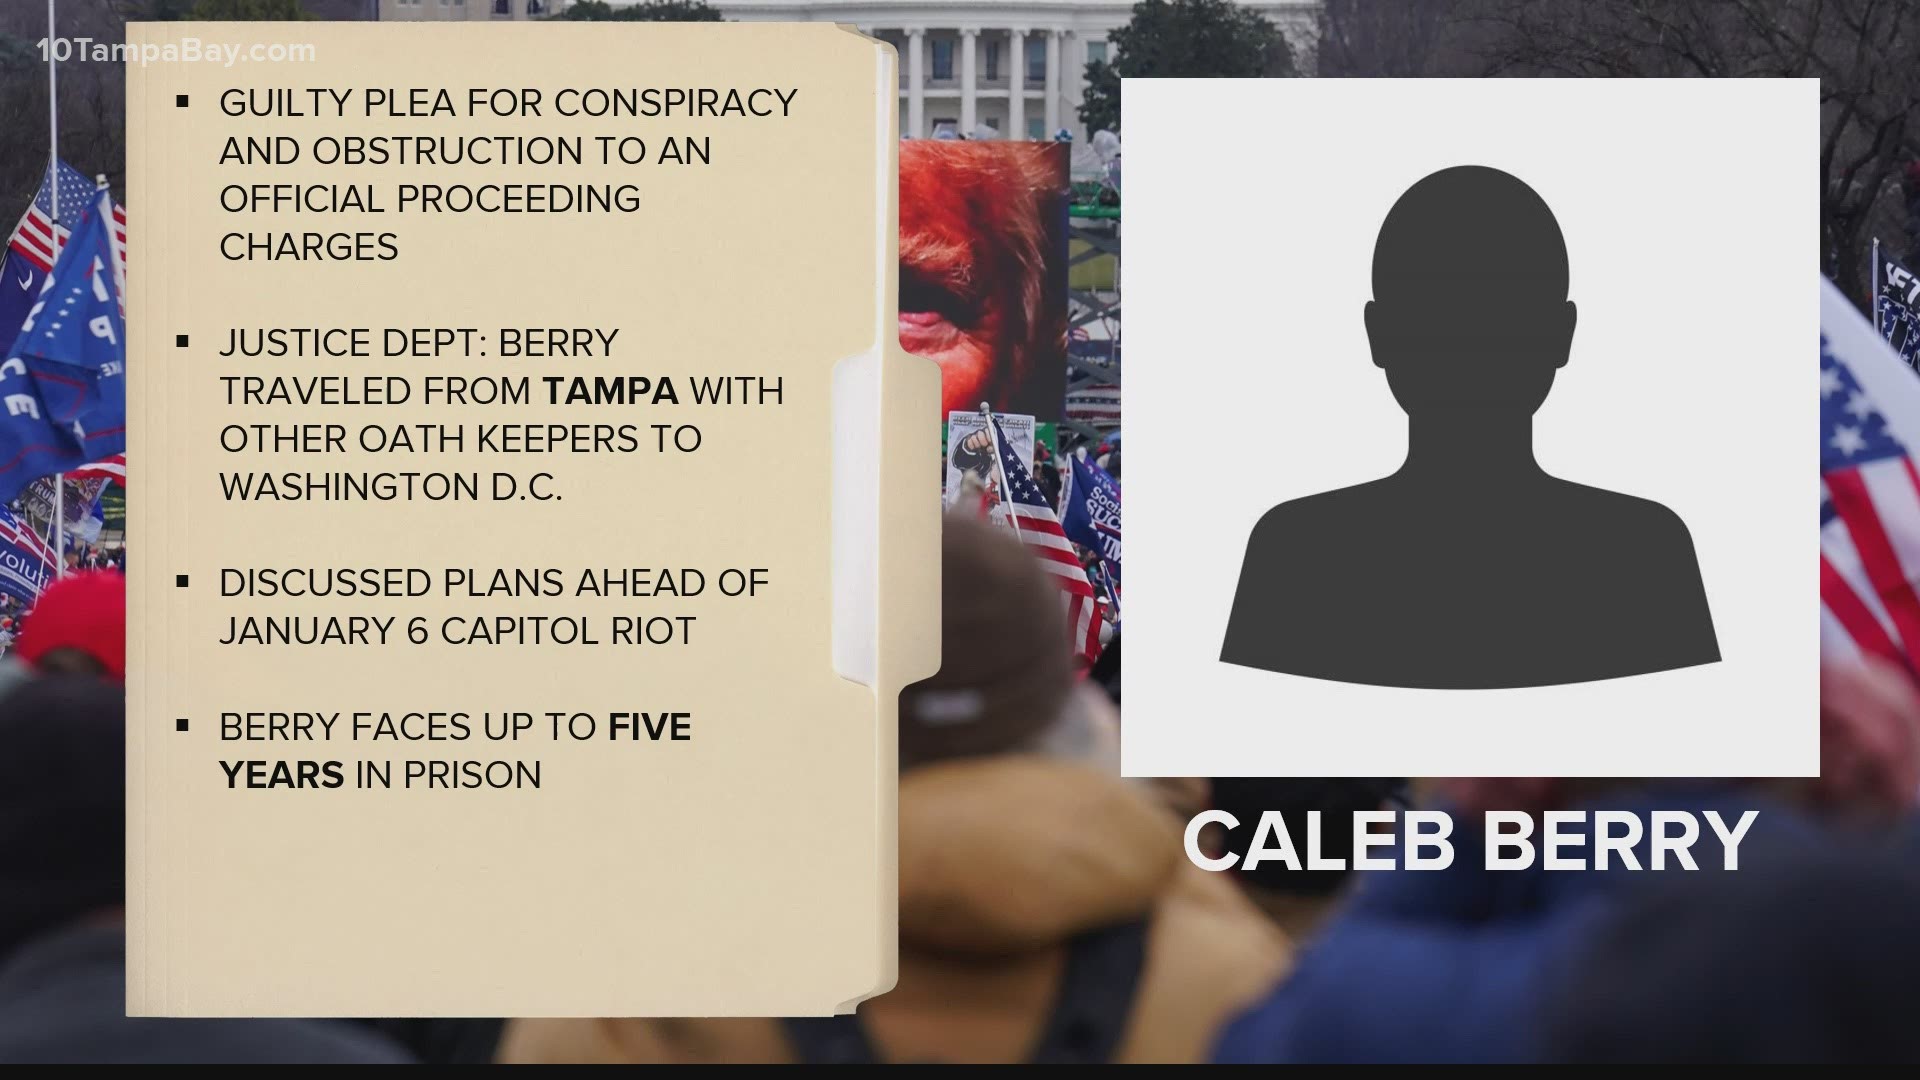 Caleb Berry agreed to cooperate with prosecutors in their investigation of the Jan. 6 insurrection, according to the Department of Justice.